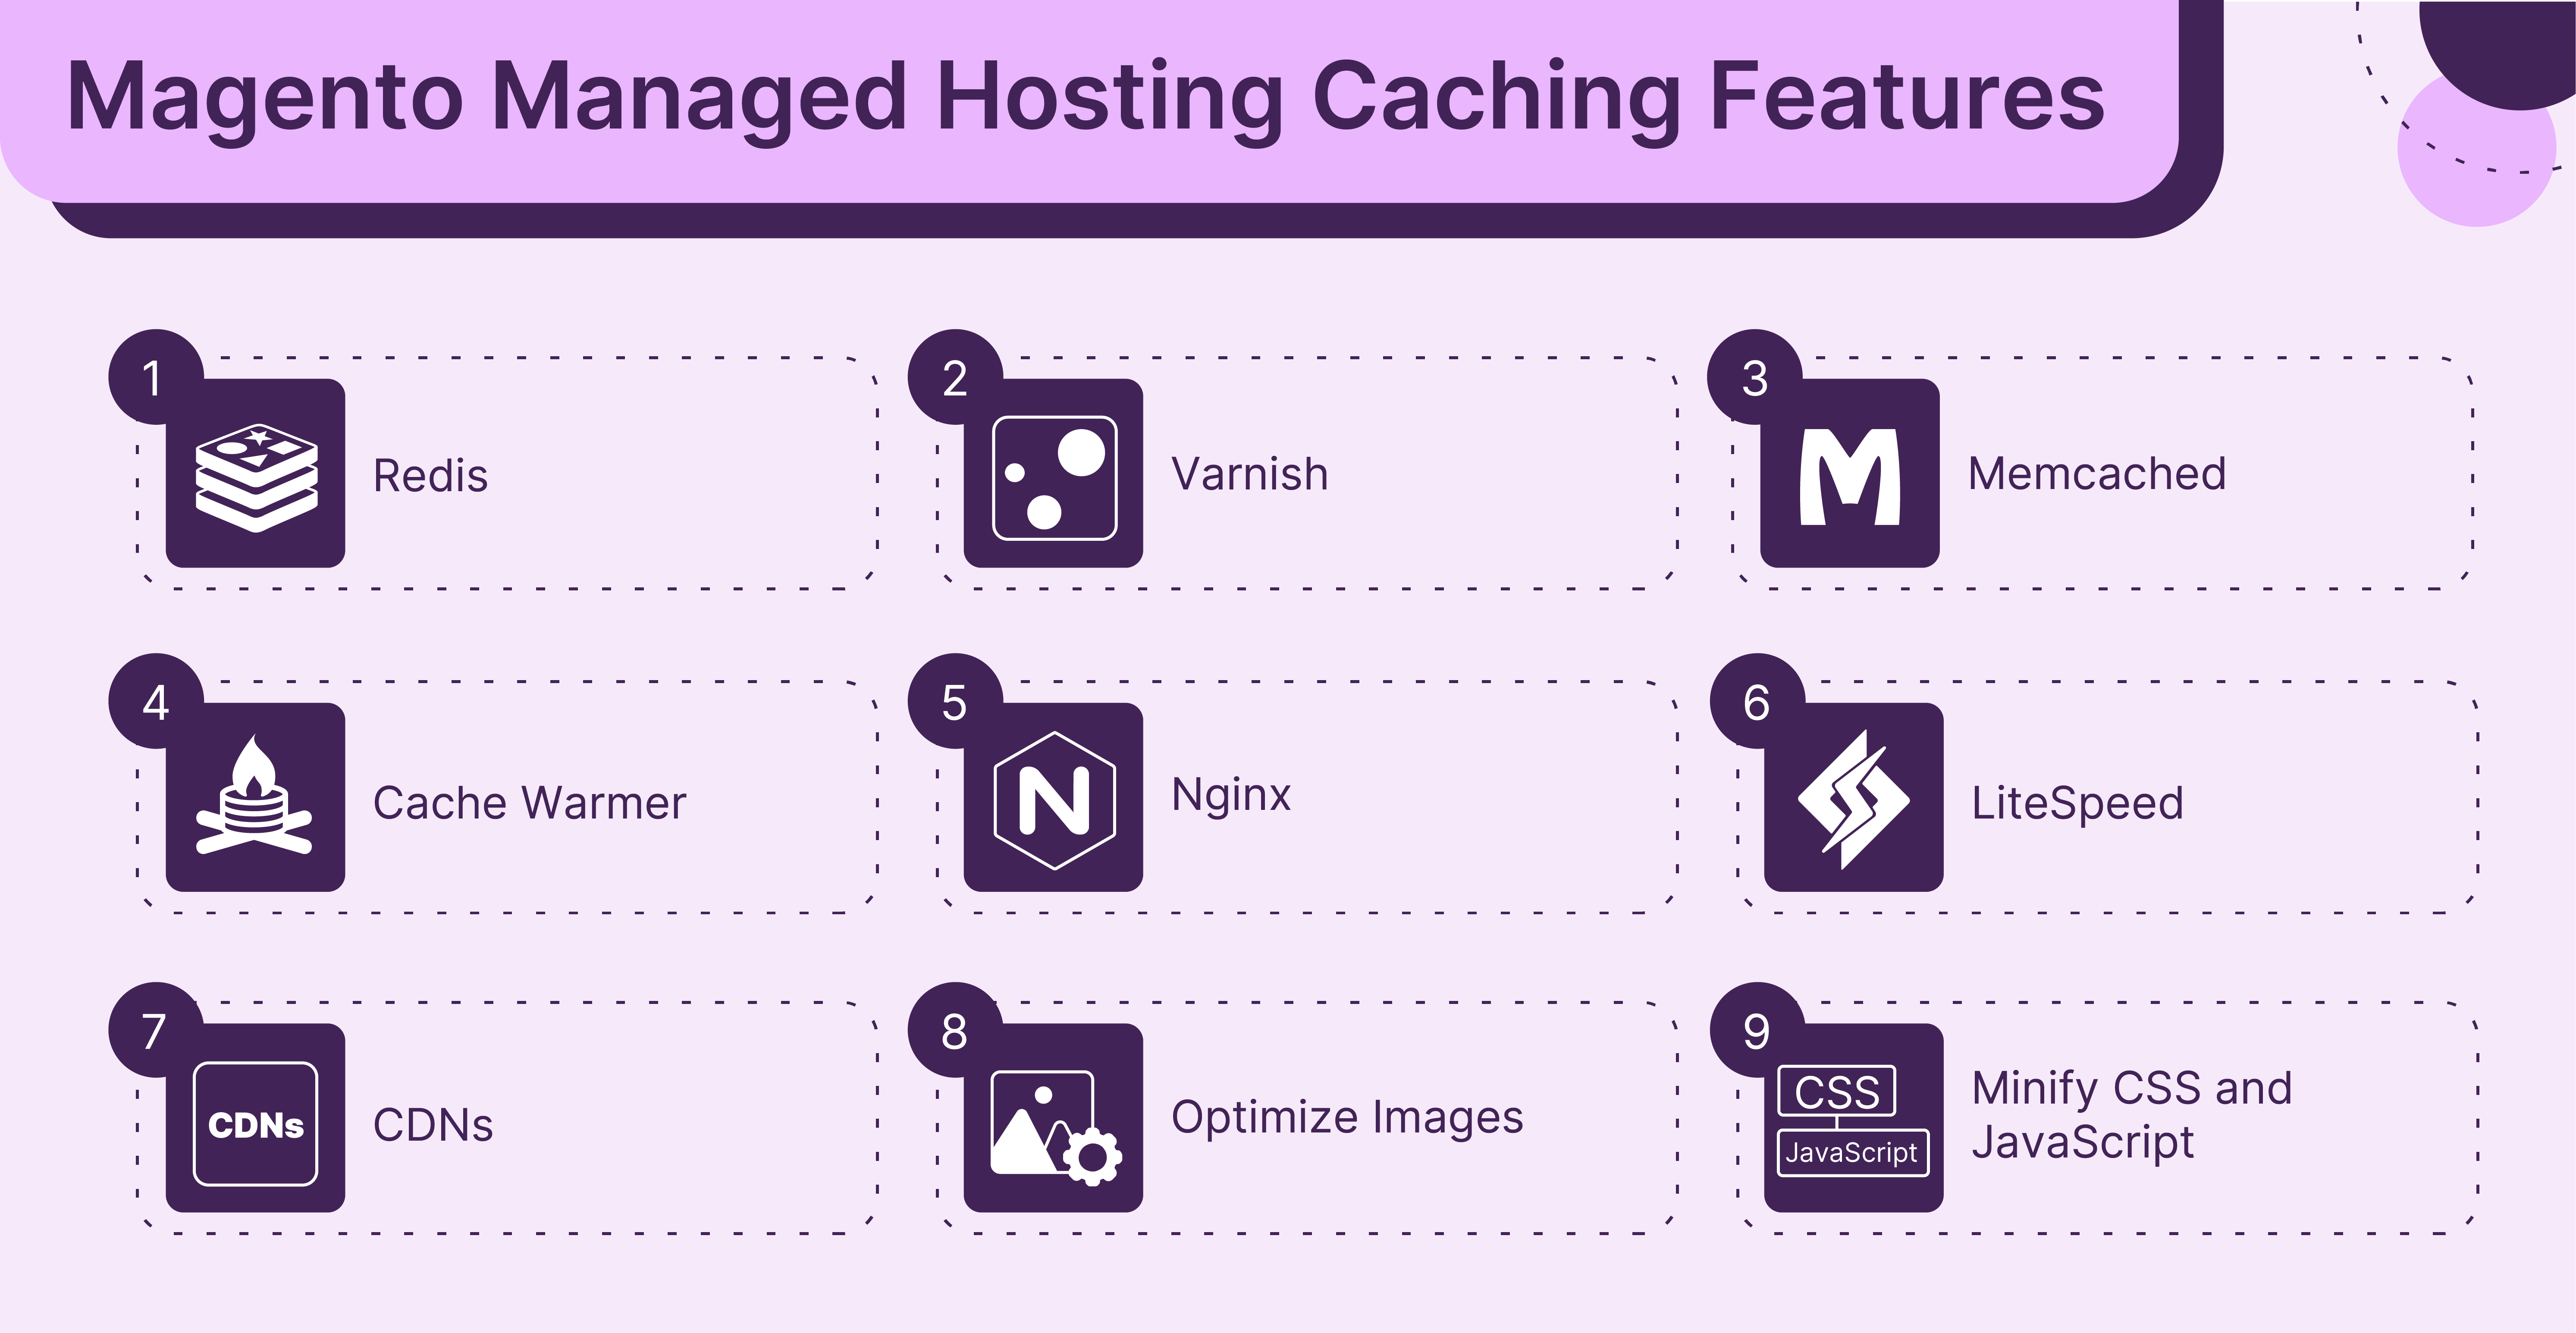 Features of Magento 2 Managed Hosting